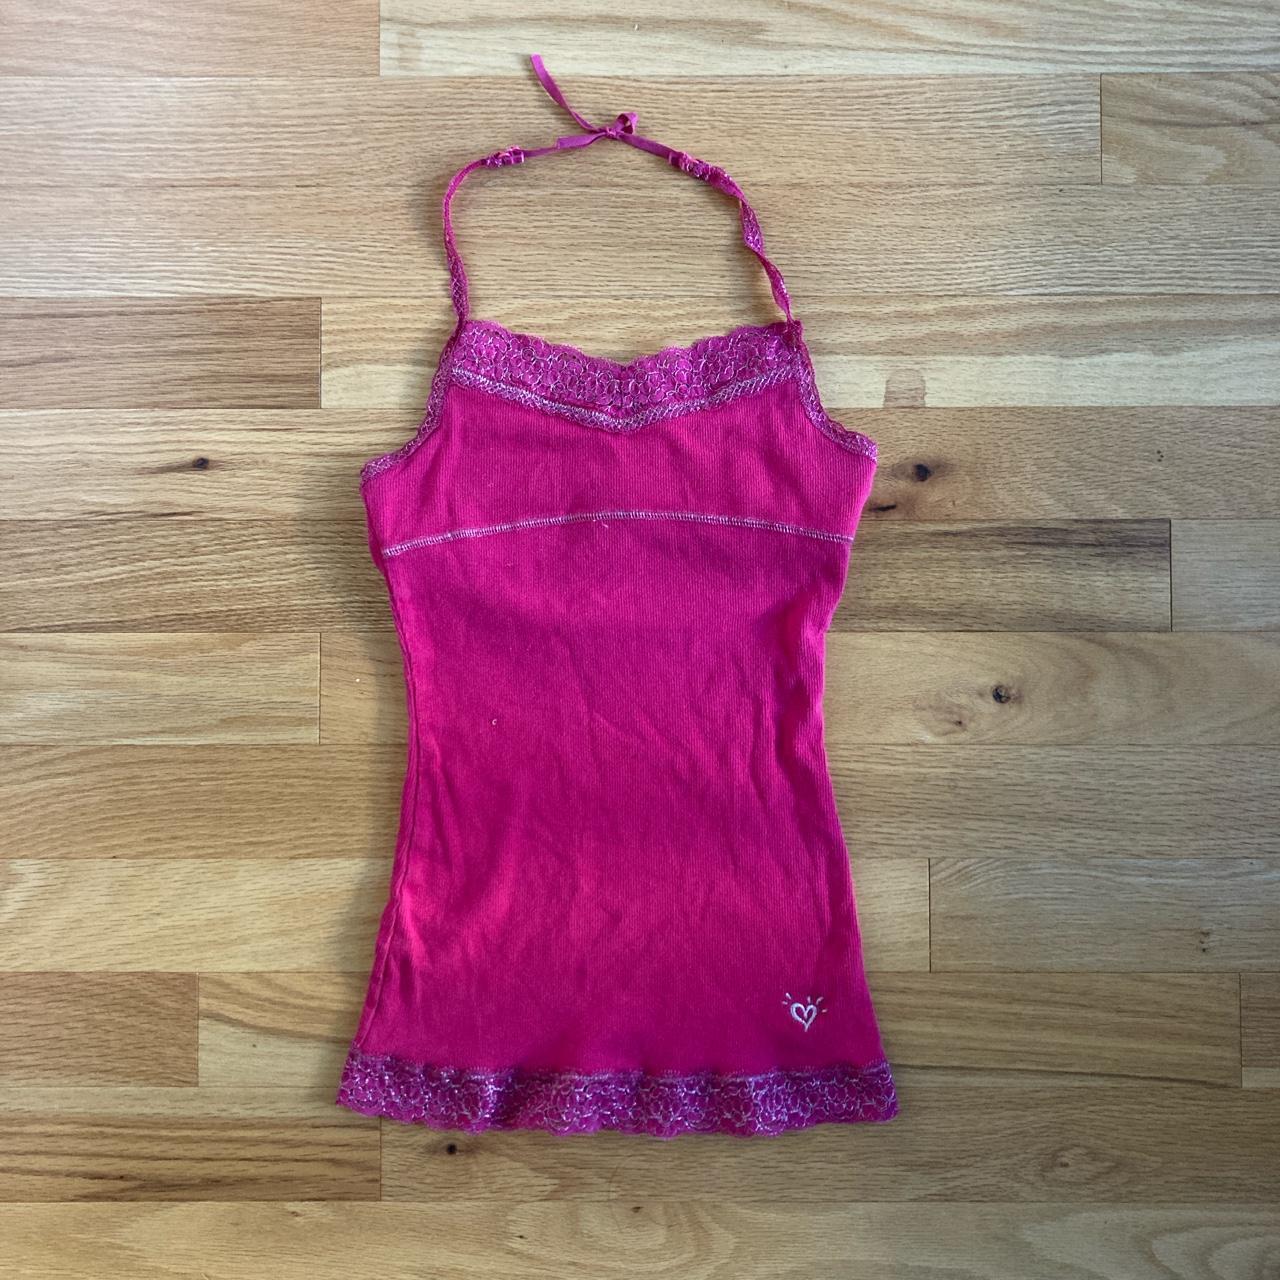 Pink lace tank 🎀🎀 - built in bra - size 10 youth,... - Depop